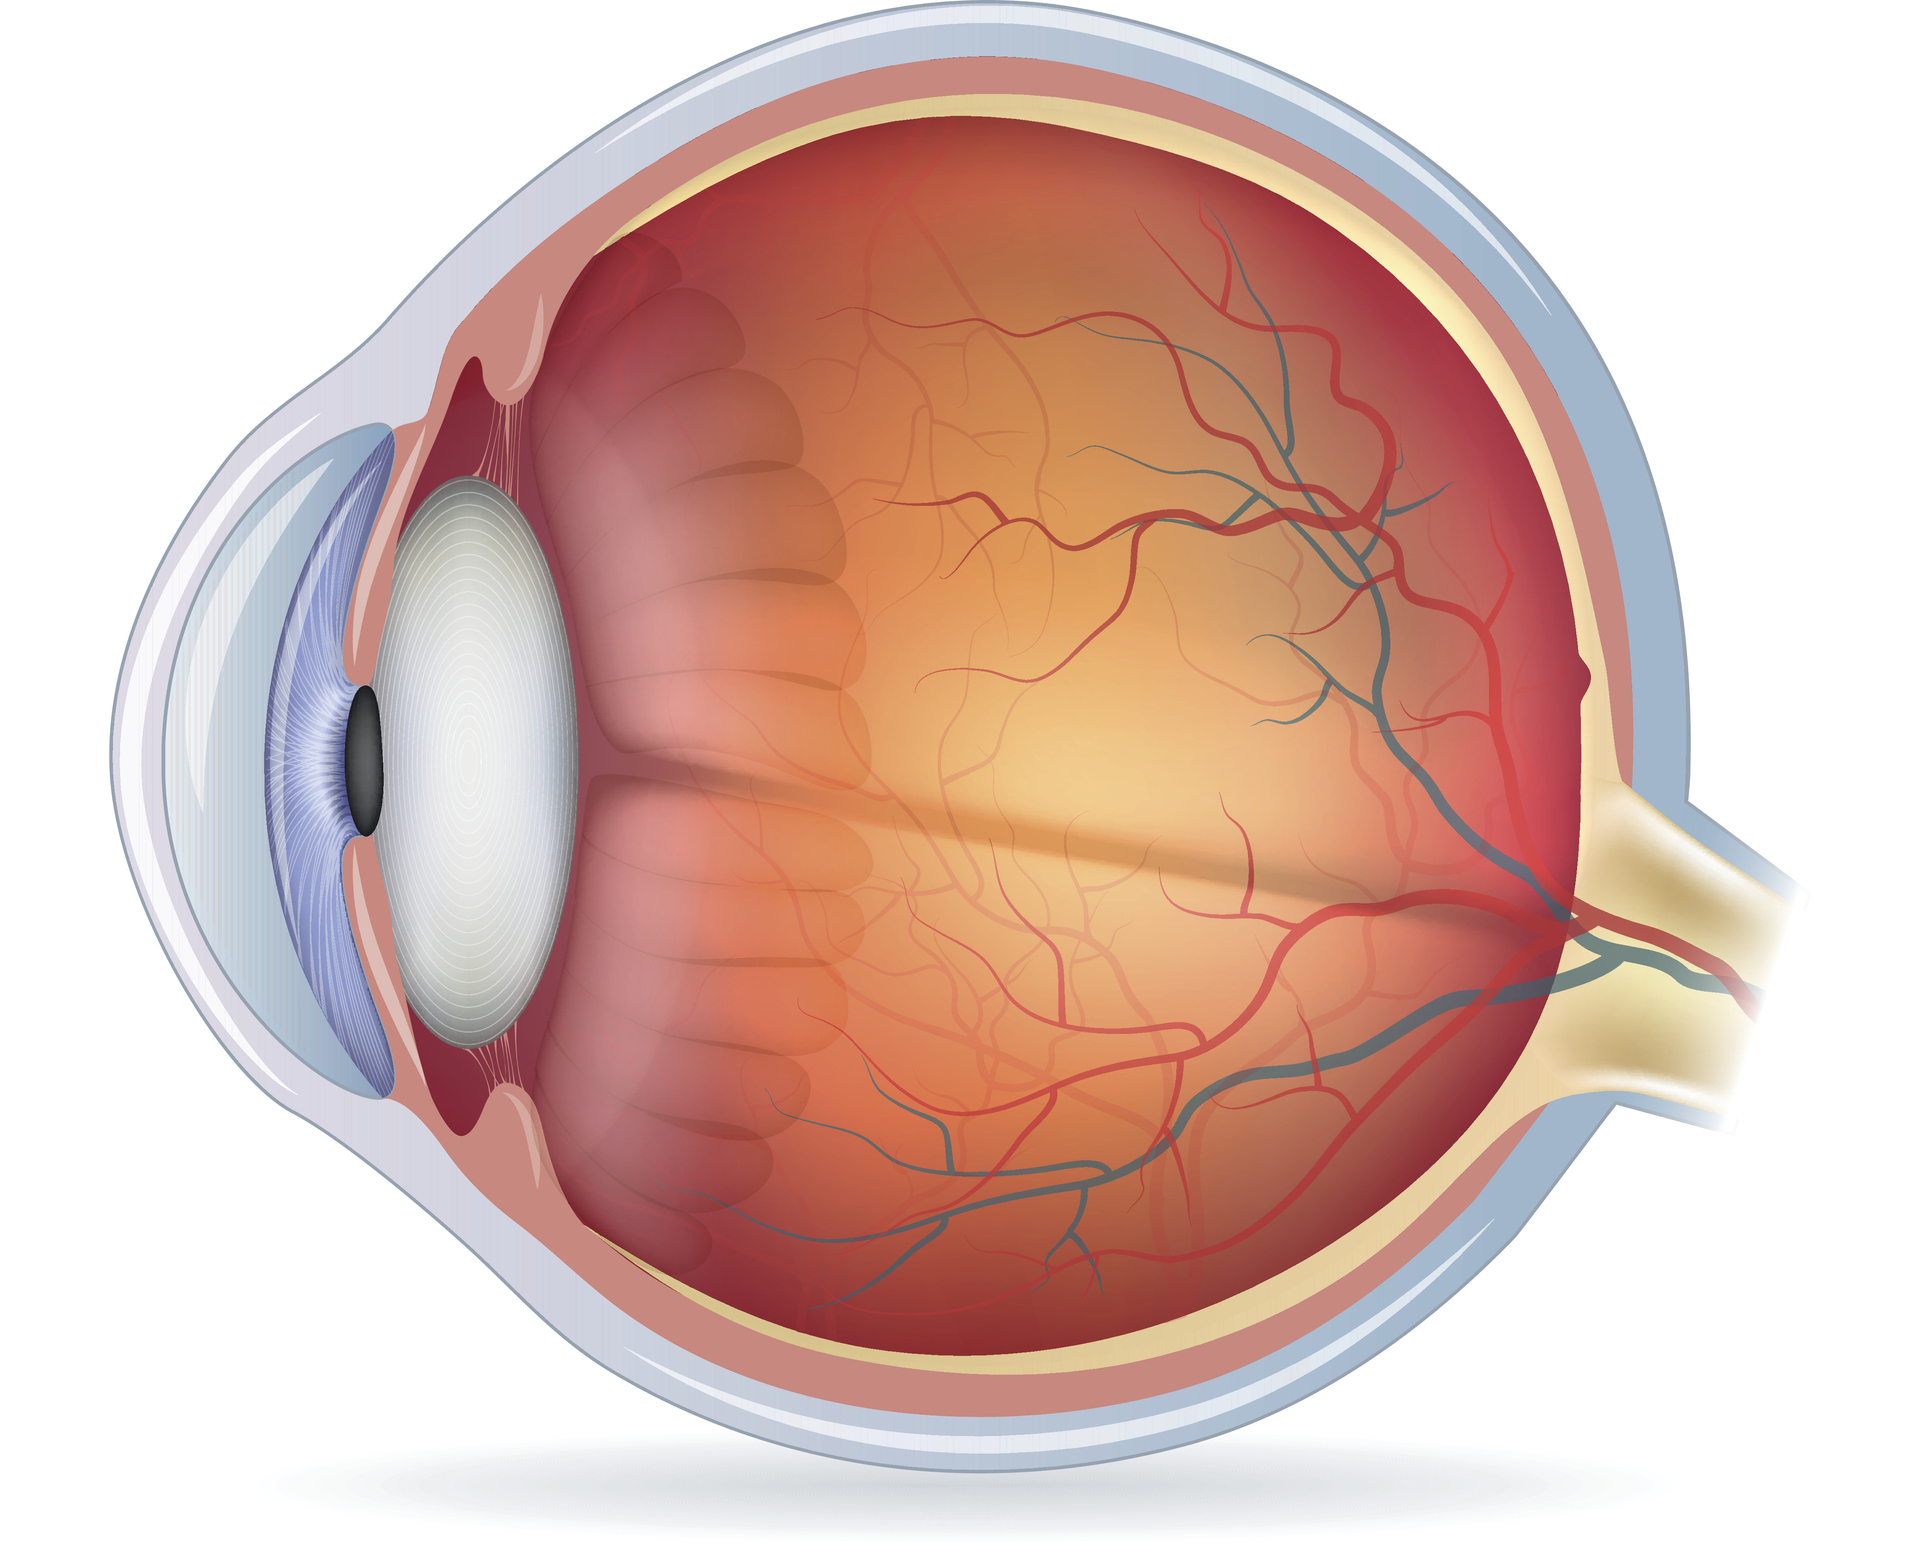 Preserflo Microshunt (PSM) With Mitomycin C for the Open Angle Glaucoma Treatment